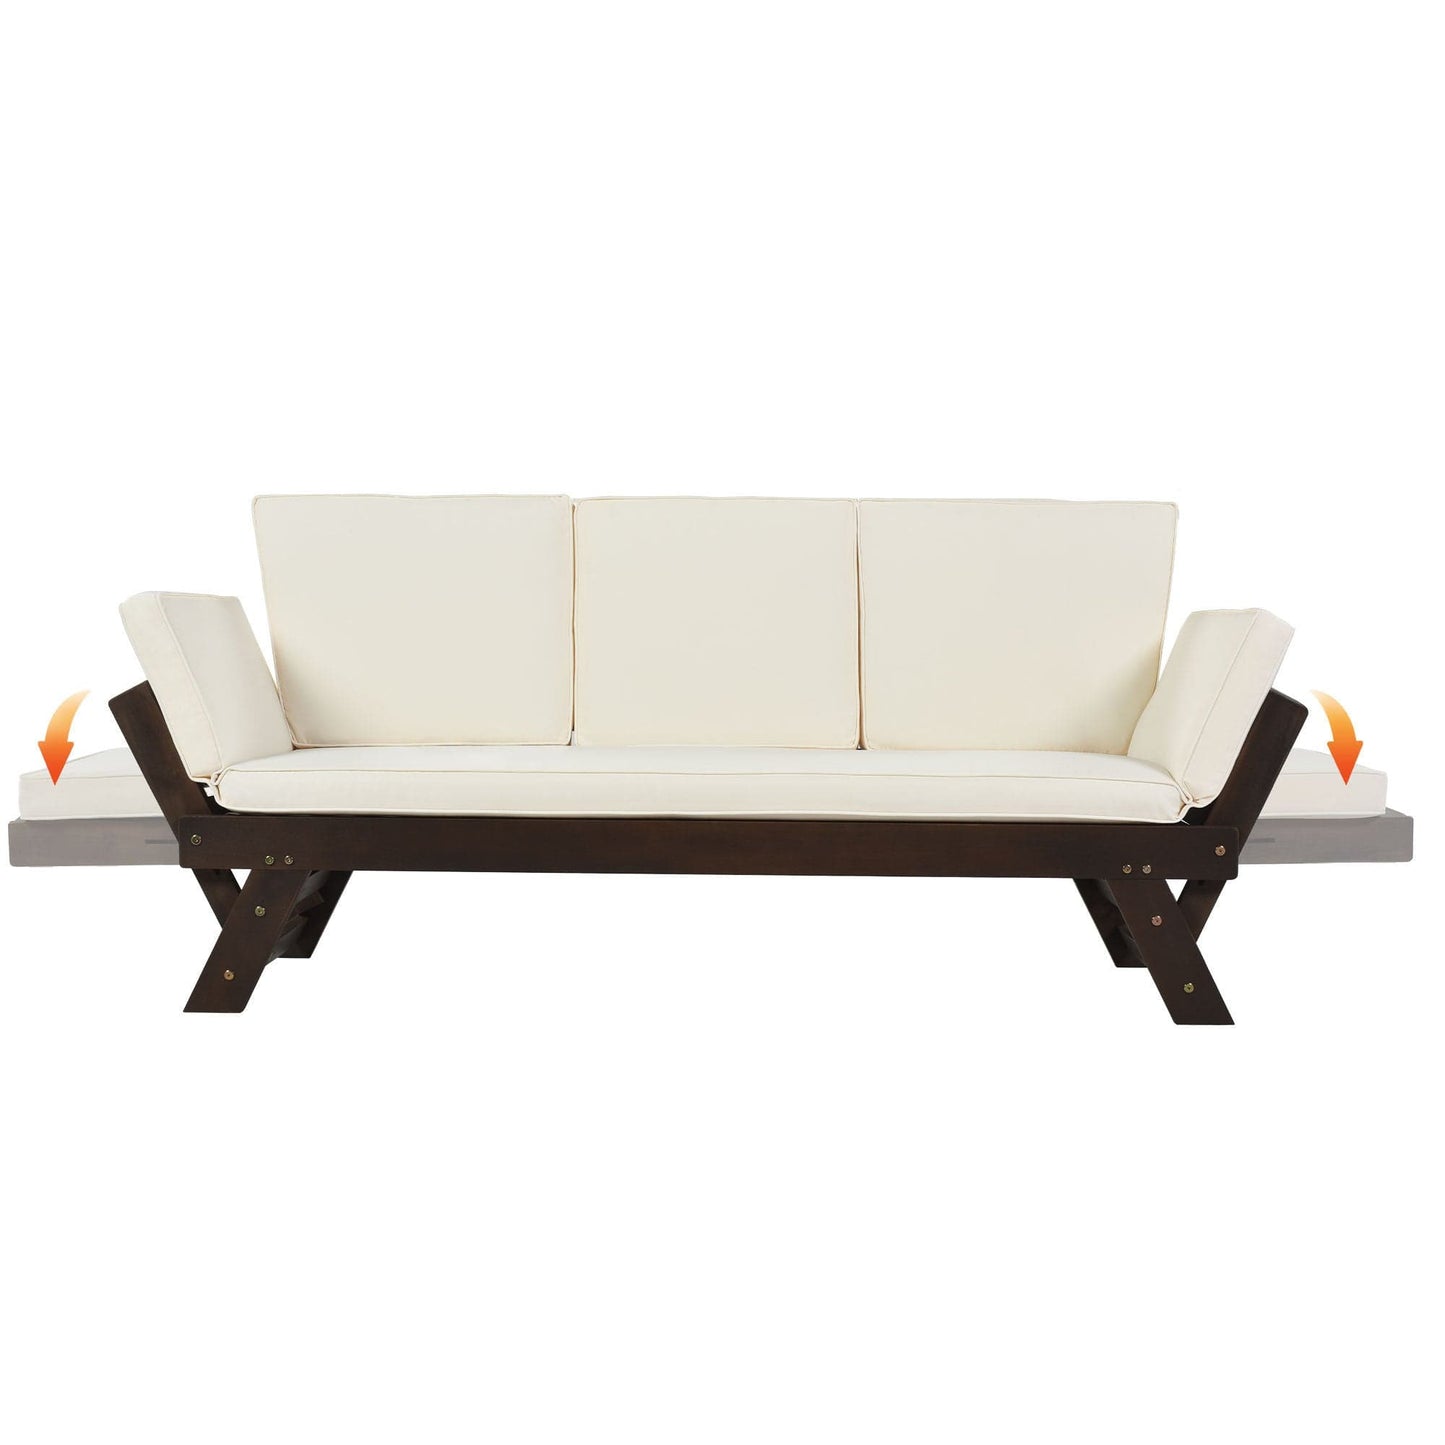 TOPMAX Outdoor Adjustable Patio Wooden Daybed Sofa Chaise Lounge, Brown Finish Beige Cushion